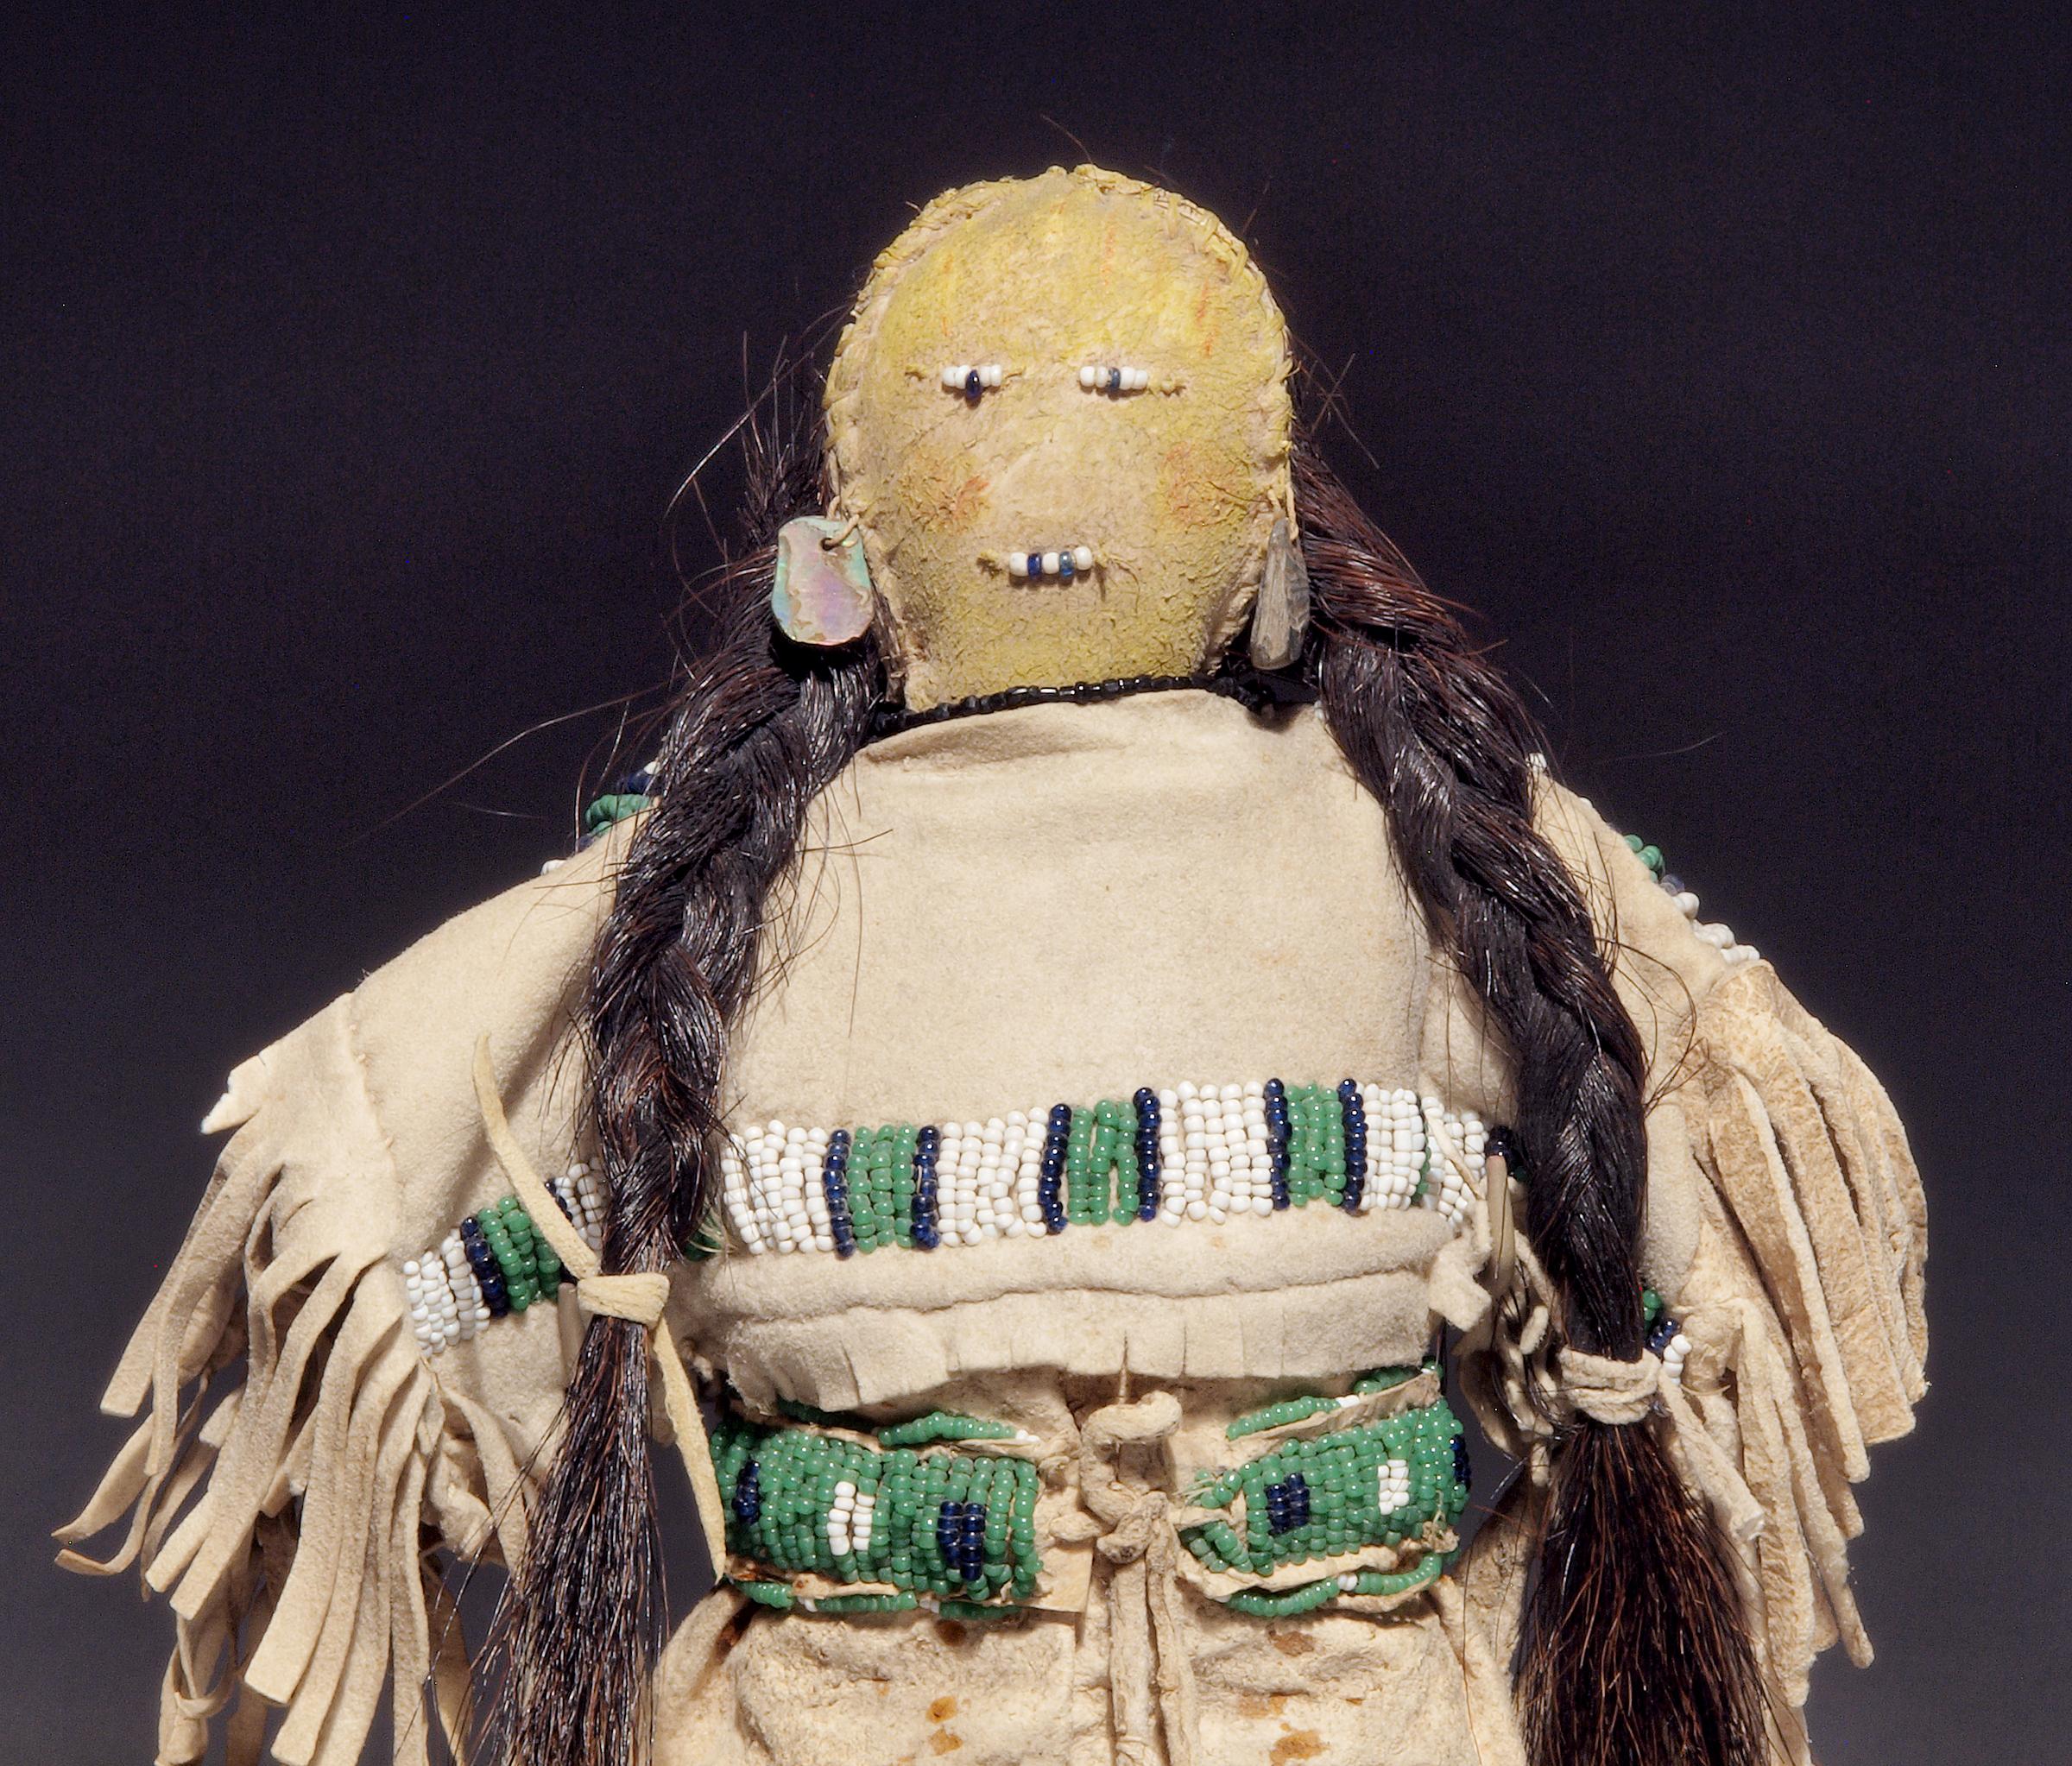 Constructed of native tanned hide with trade beads and horse hair, this doll is wearing a traditional period dress and moccasins.

A nomadic tribe, the Sioux territory included parts of present-day North and South Dakota, Wisconsin, Iowa, Minnesota,